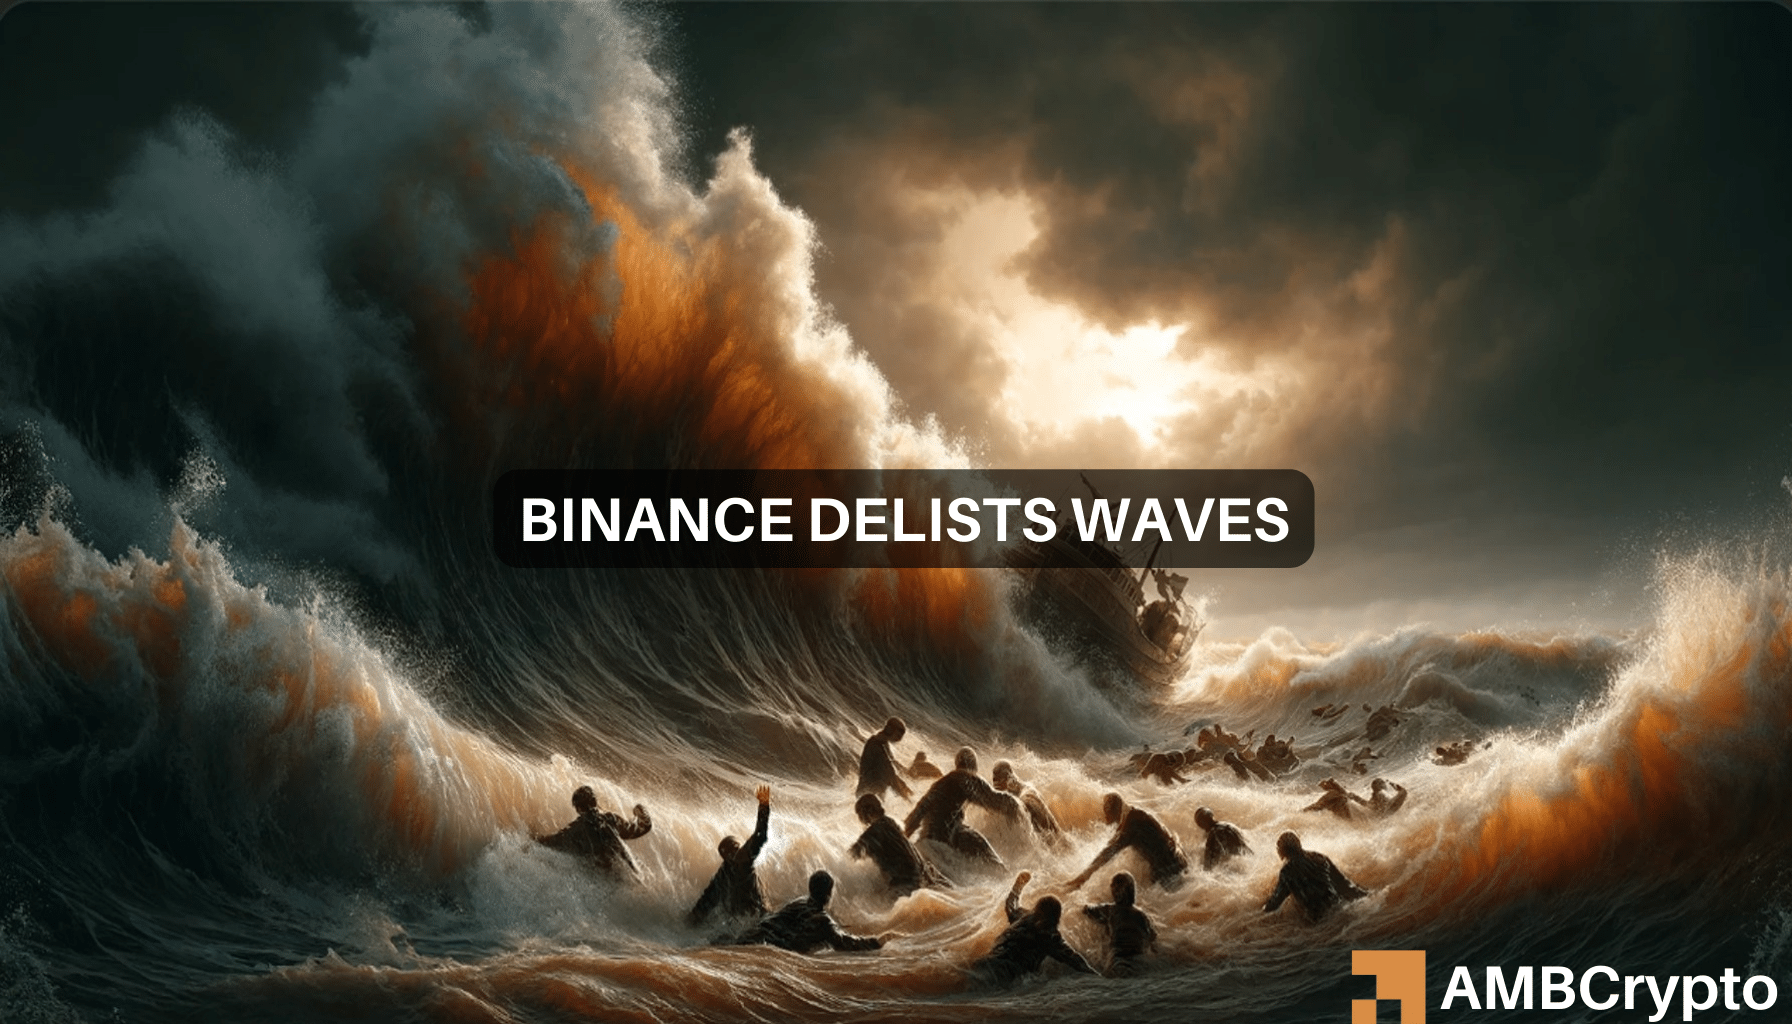 Binance delists WAVES crypto: Will prices fall below $1 now?